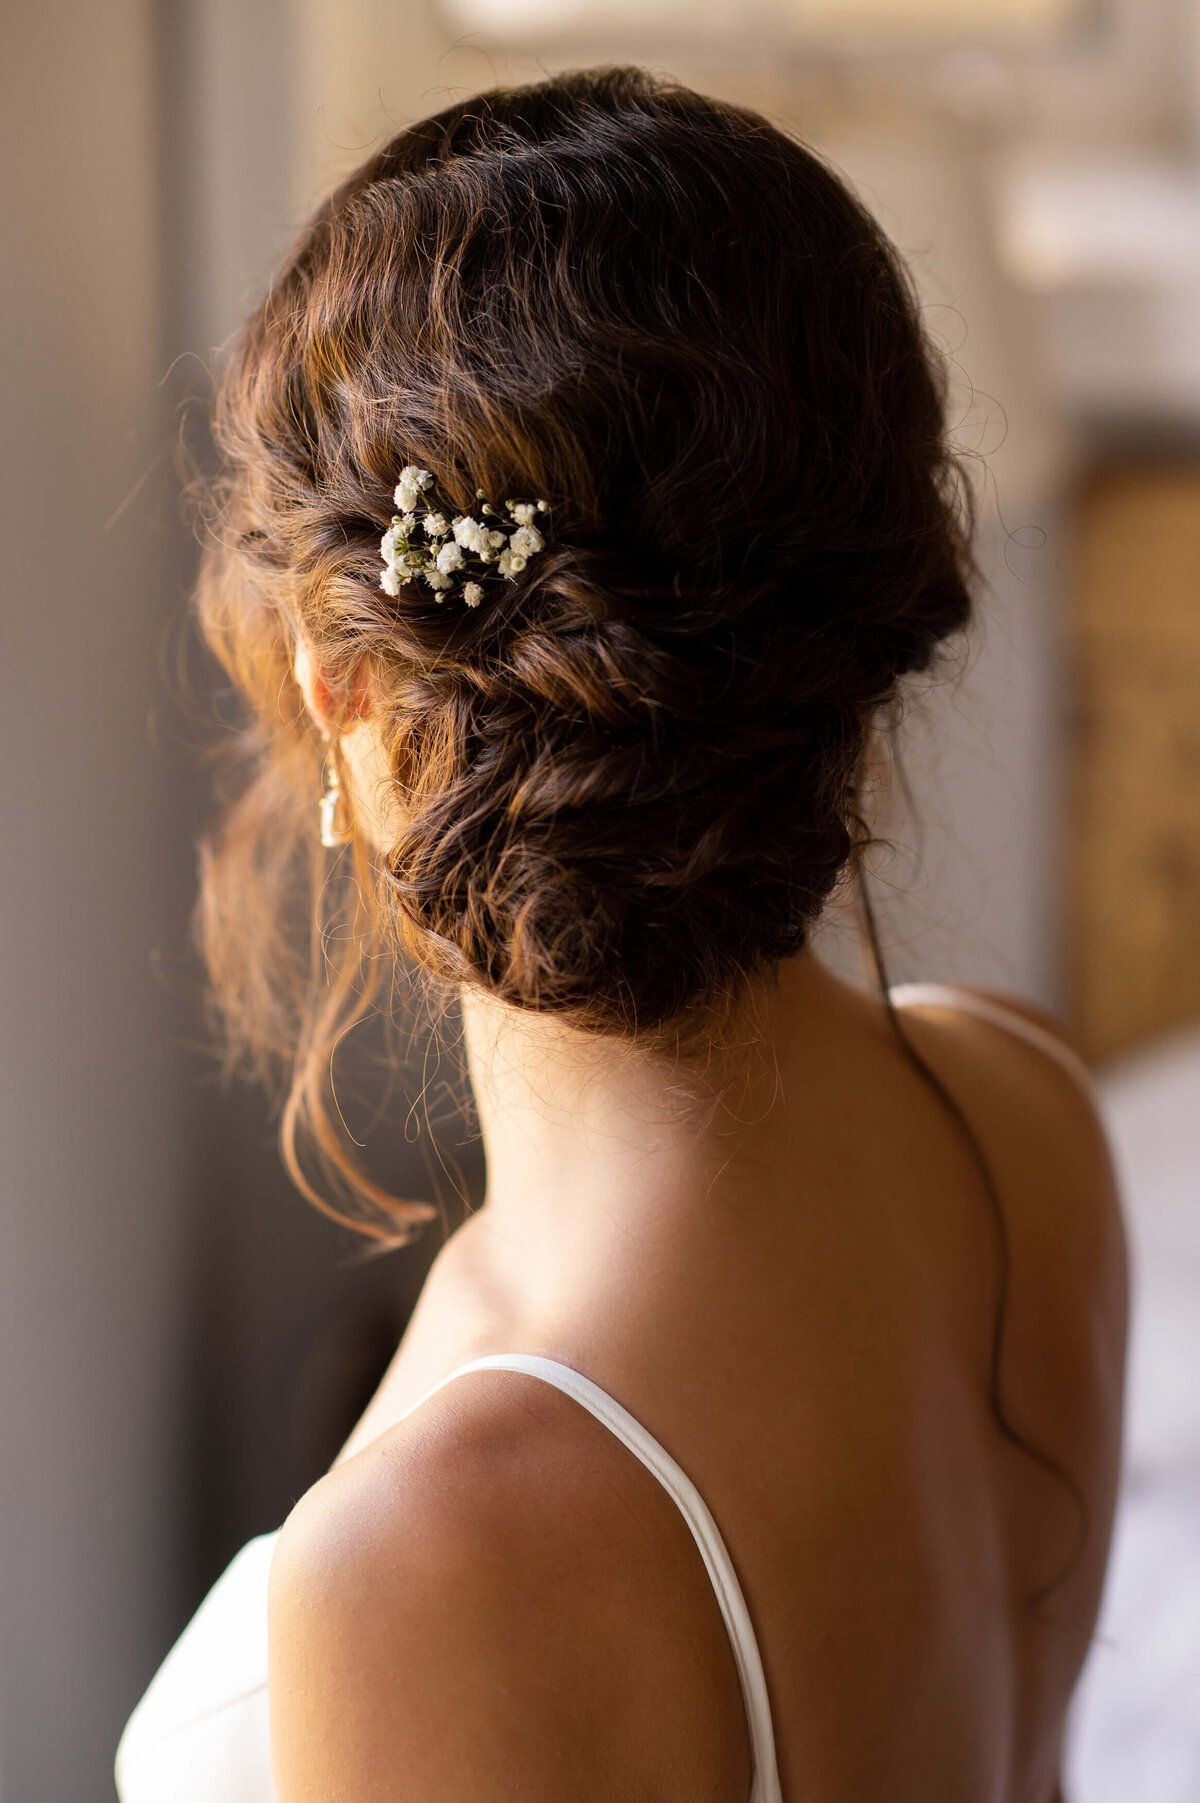 the back of a loose bridal hair updo adorned with baby's breath popular nowadays with Ottawa weddings